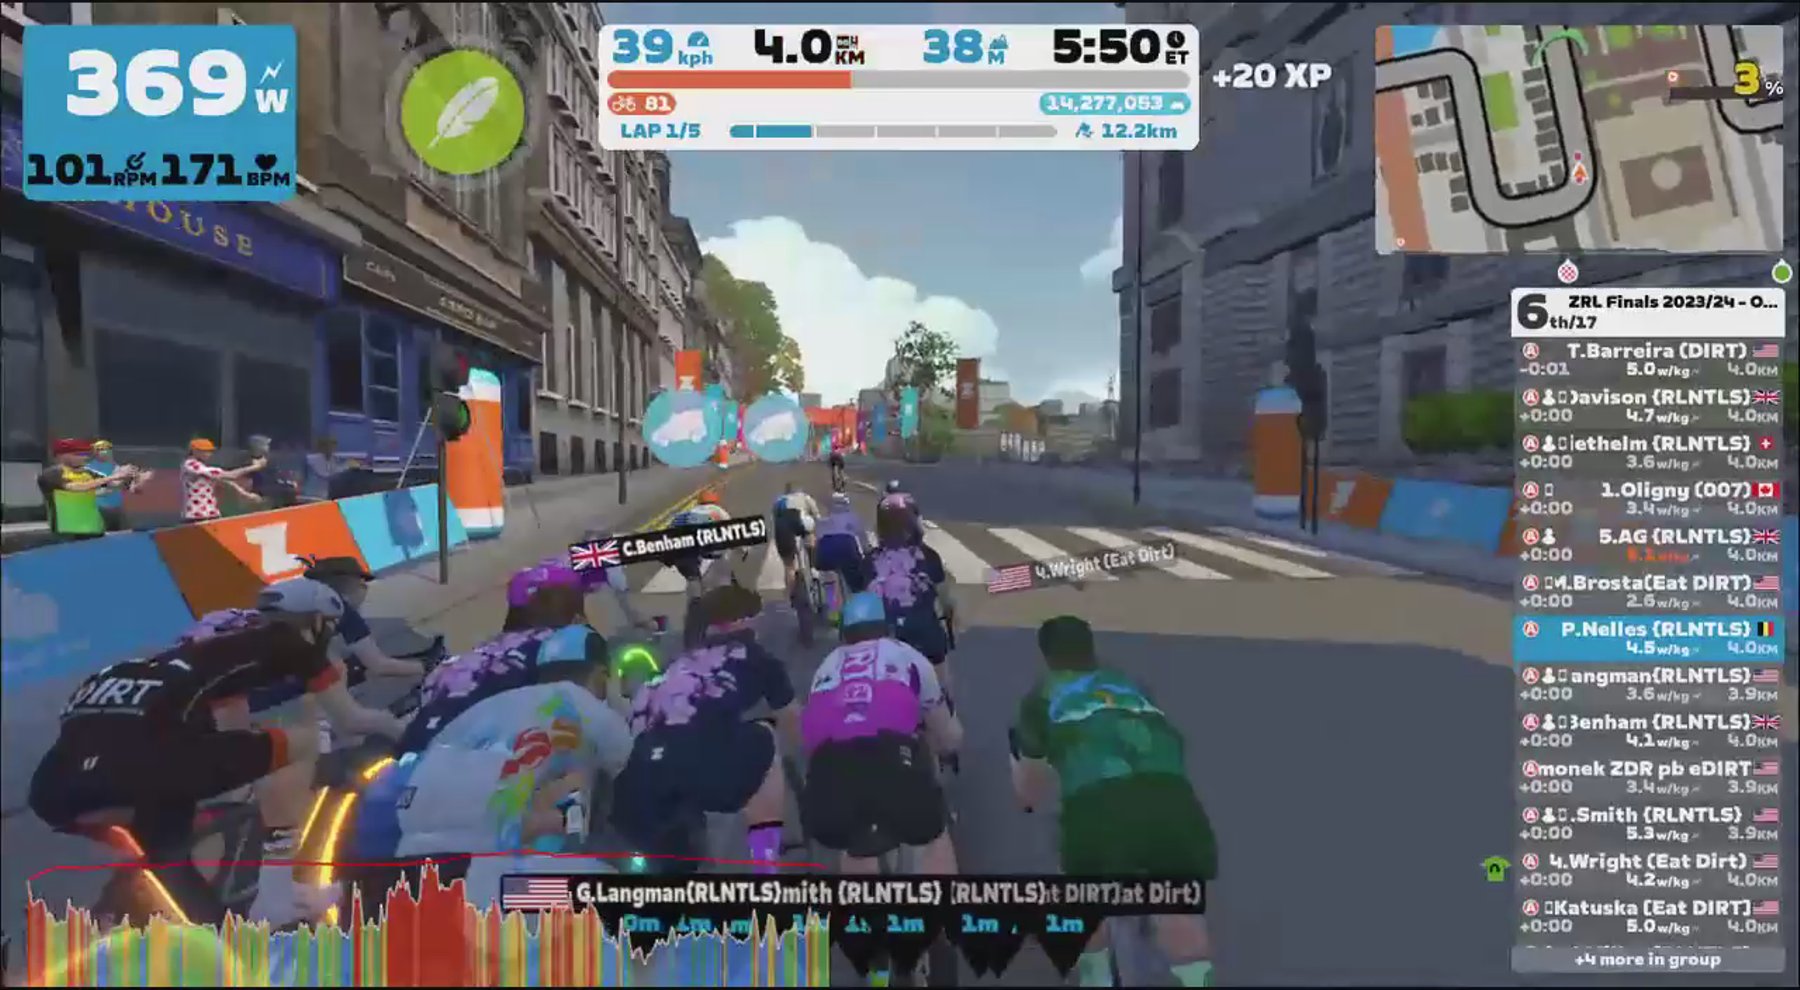 Zwift - Race: ZRL Finals 2023/24 - Open ATLANTIC Division 1 - Cup Final (Part2) (A) on Glasgow Reverse in Scotland